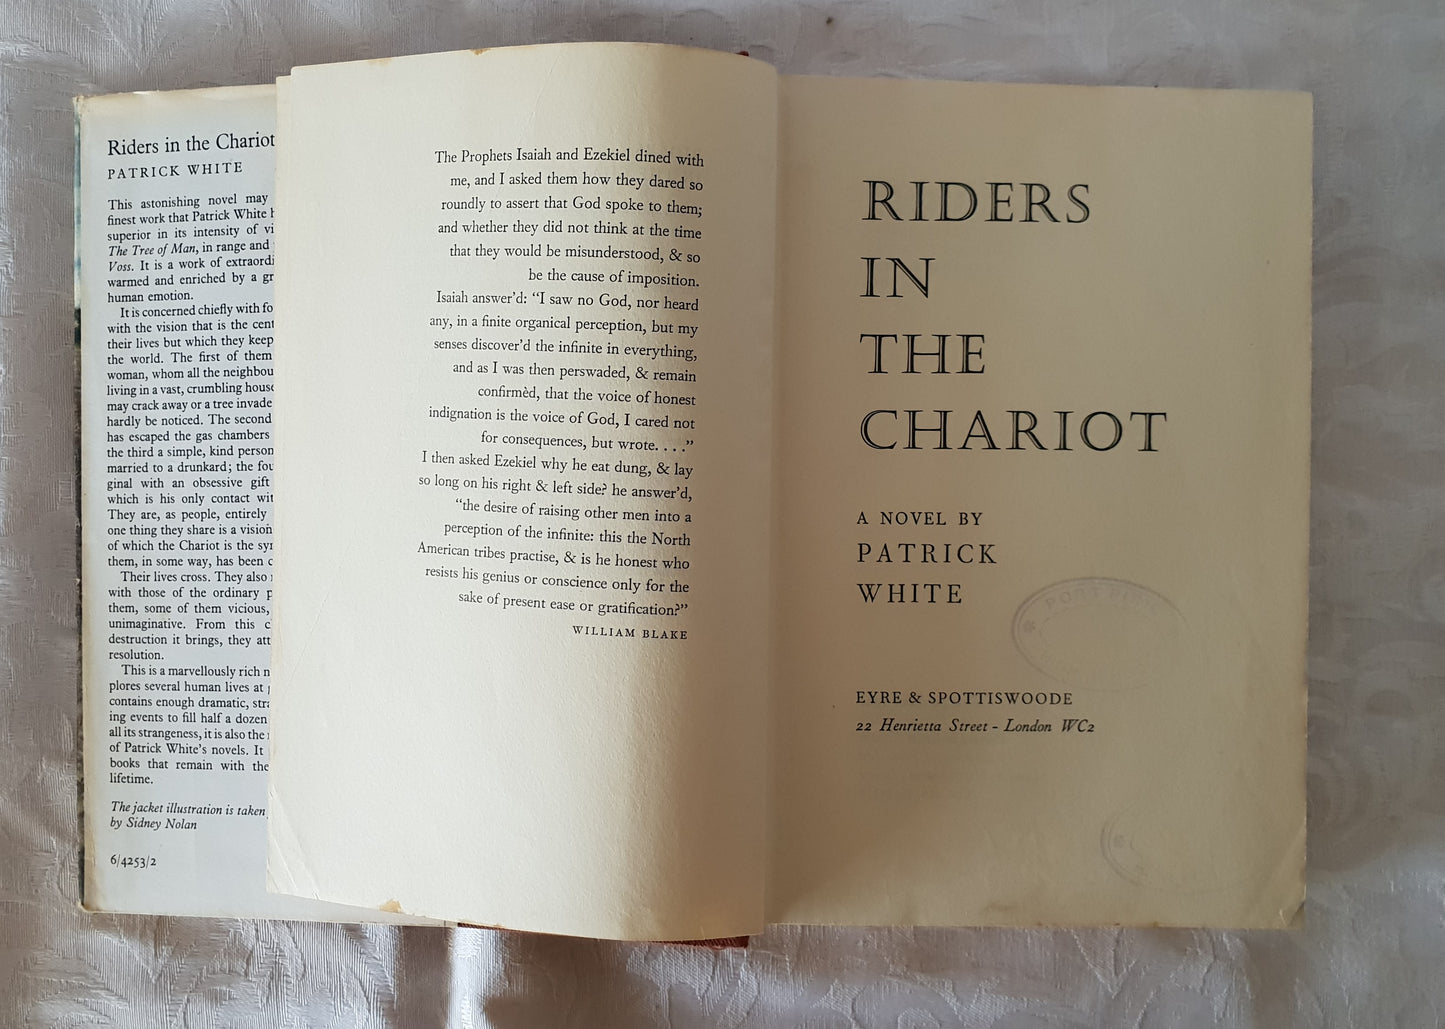 Riders in the Chariot by Patrick White